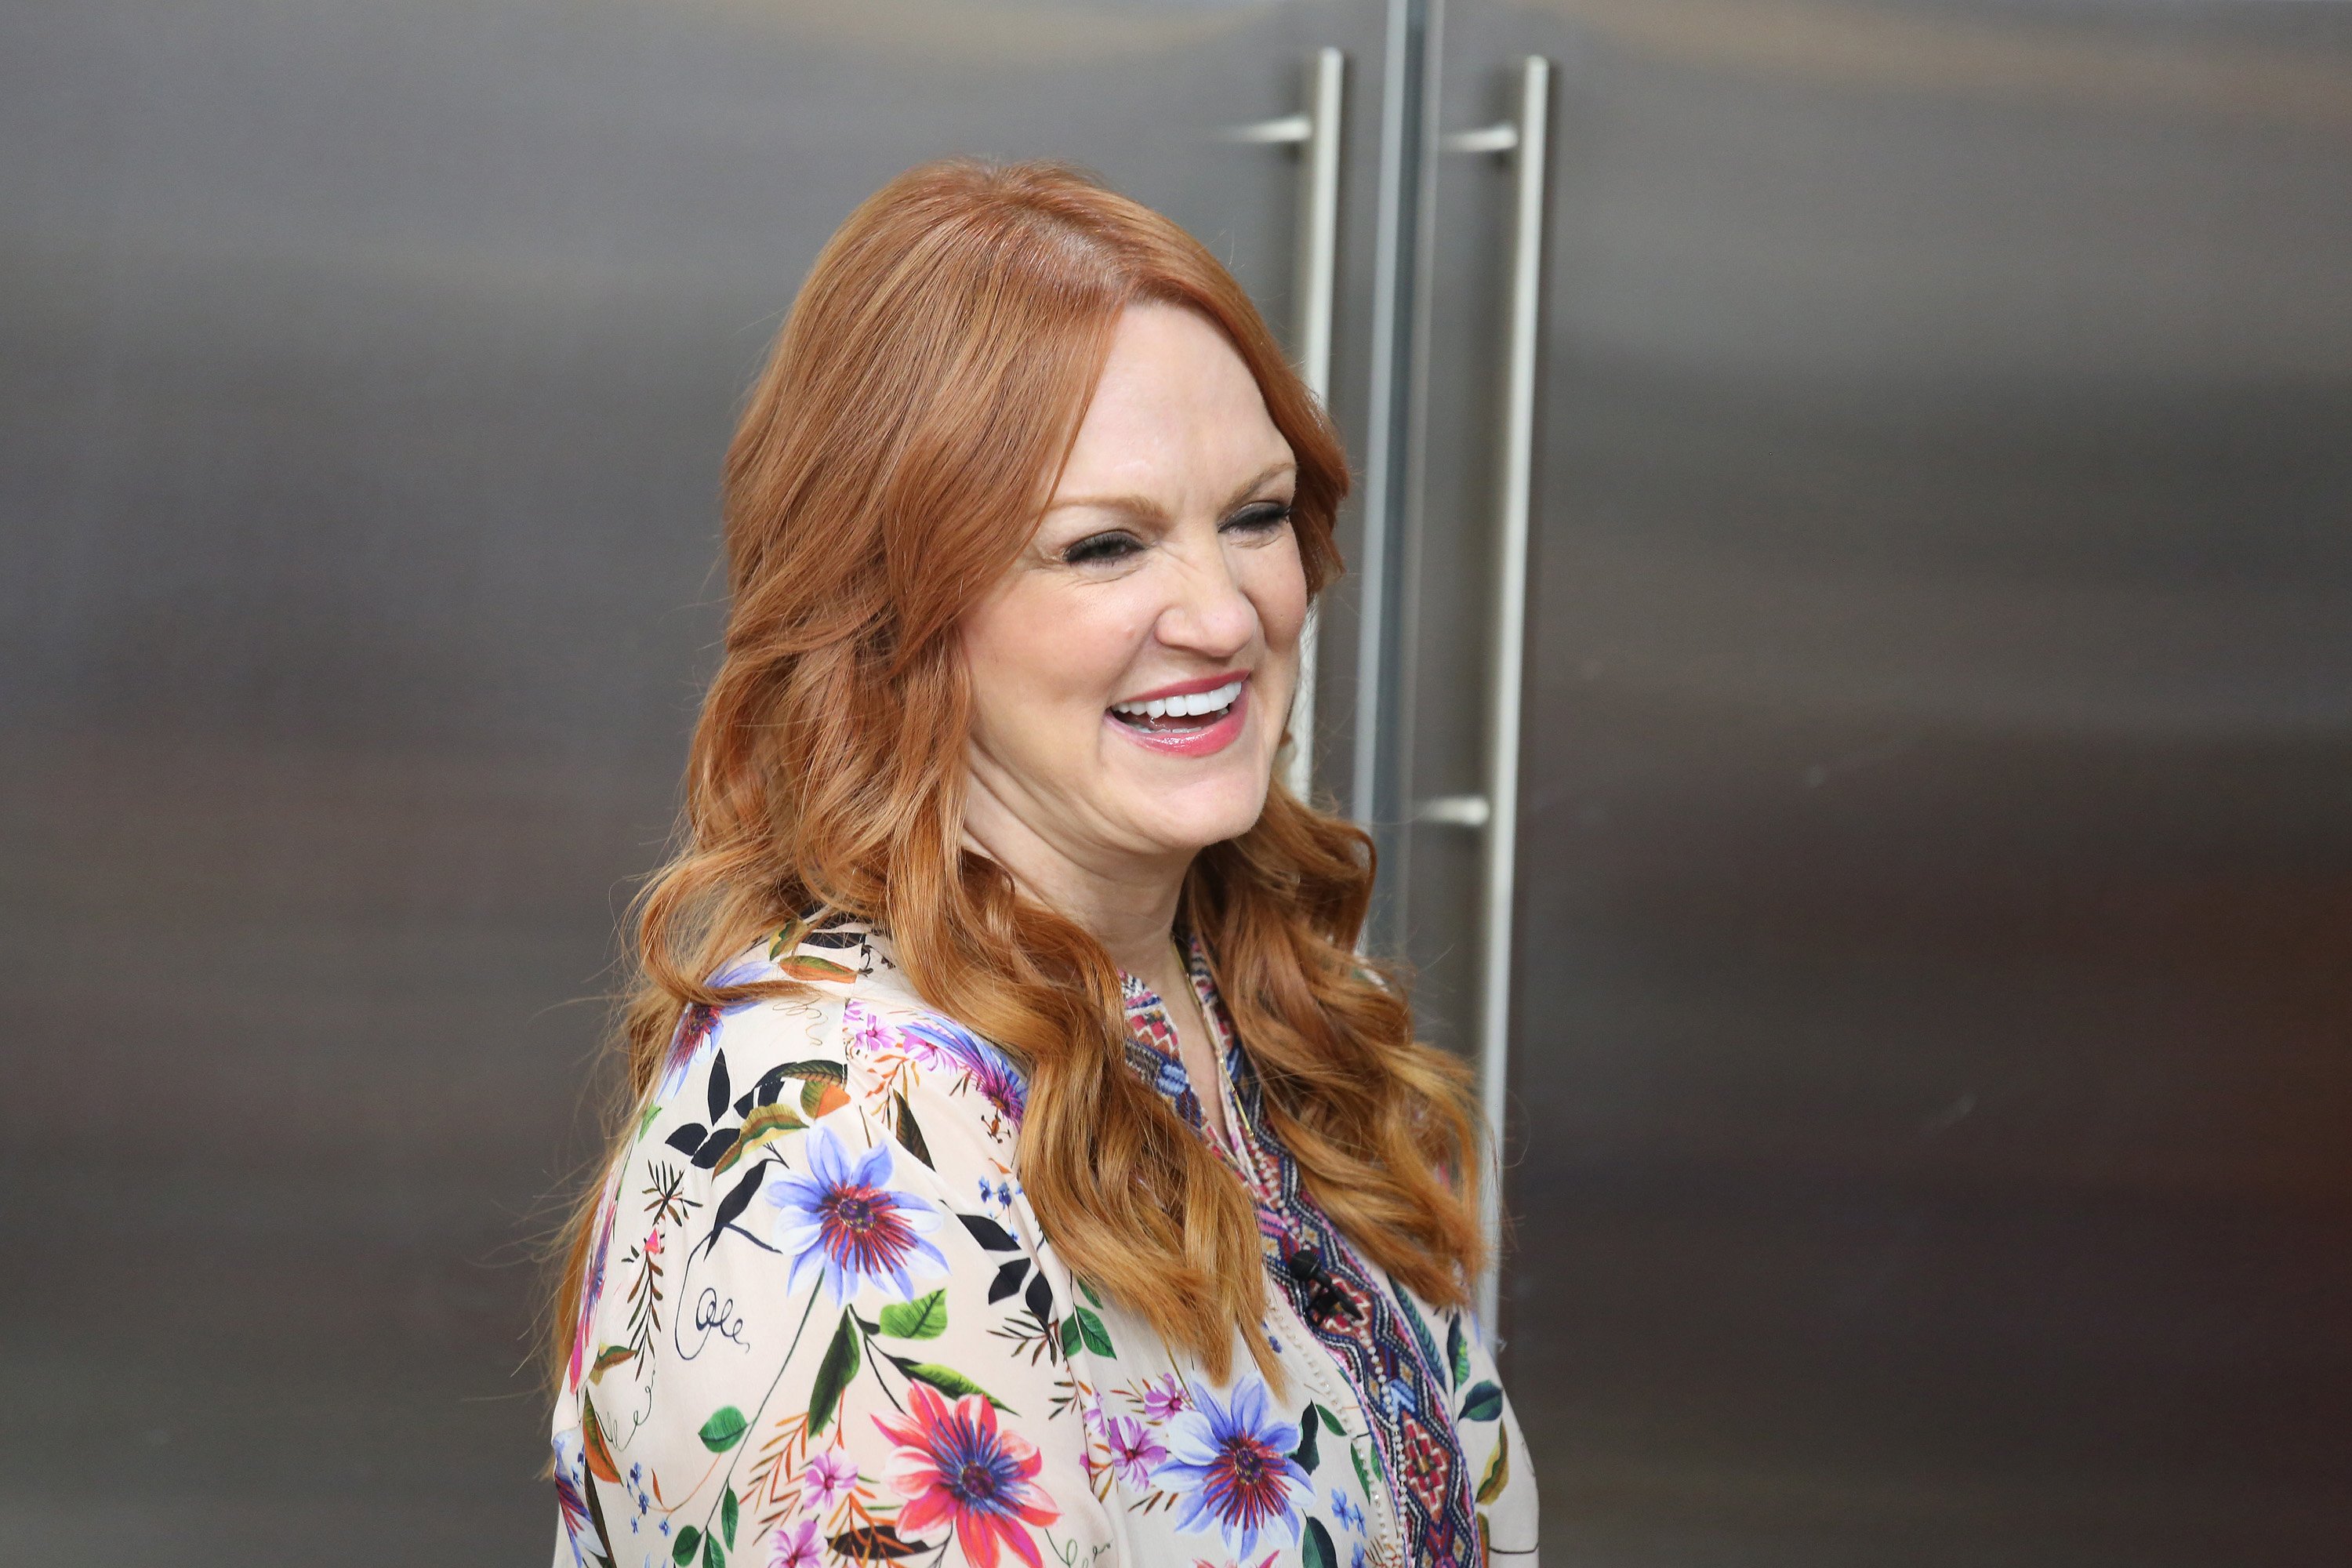 'The Pioneer Woman' star Ree Drummond appears on the morning show 'Today' in 2019